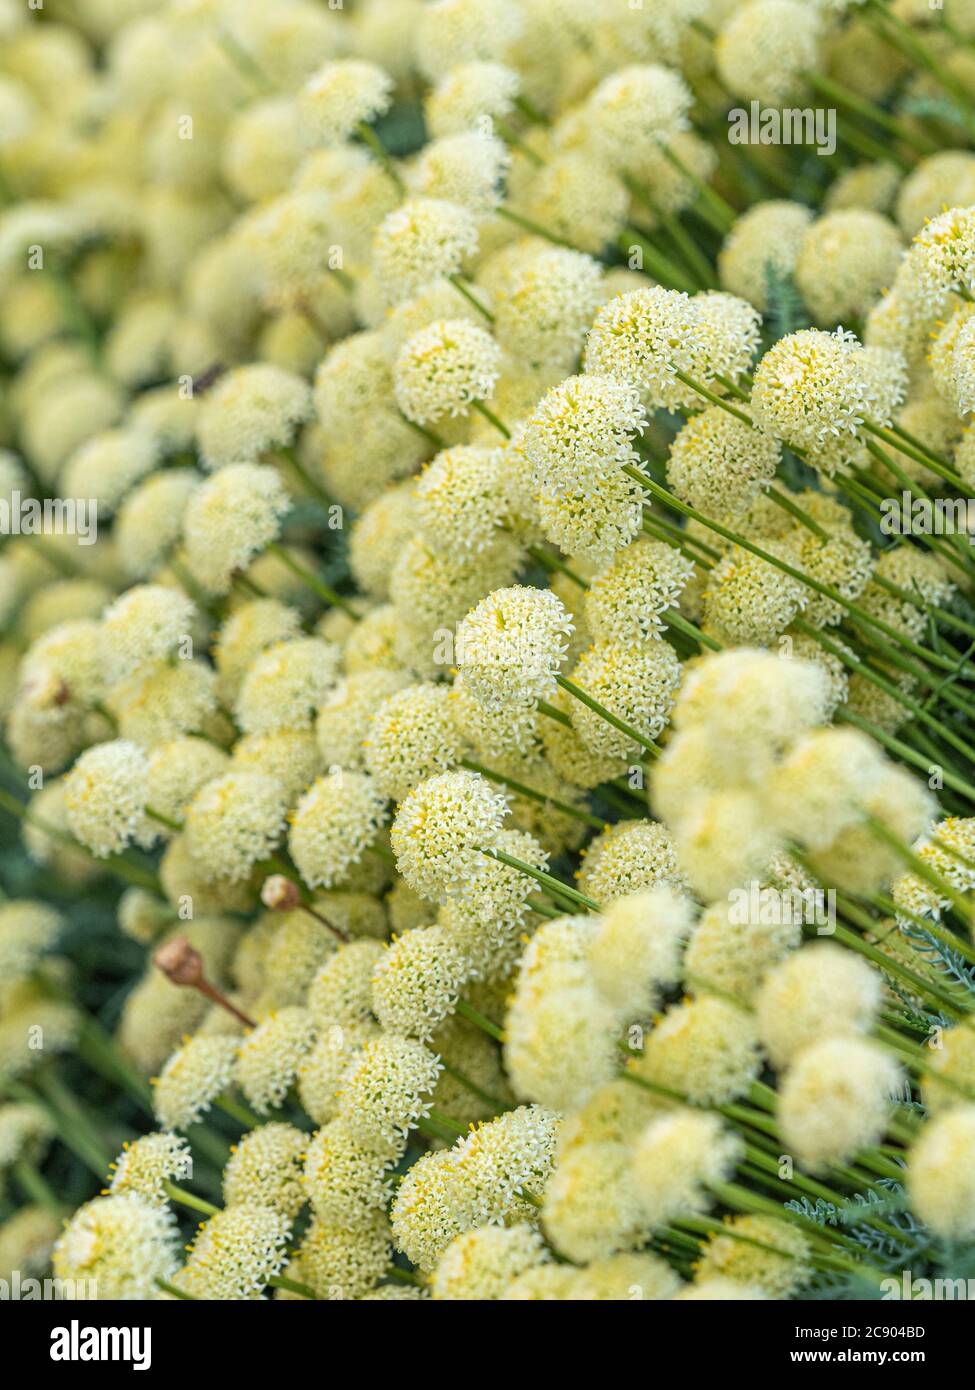 The pale yellow flowers of Santolina pinnata subsp. neapolitana growing in a garden. Stock Photo